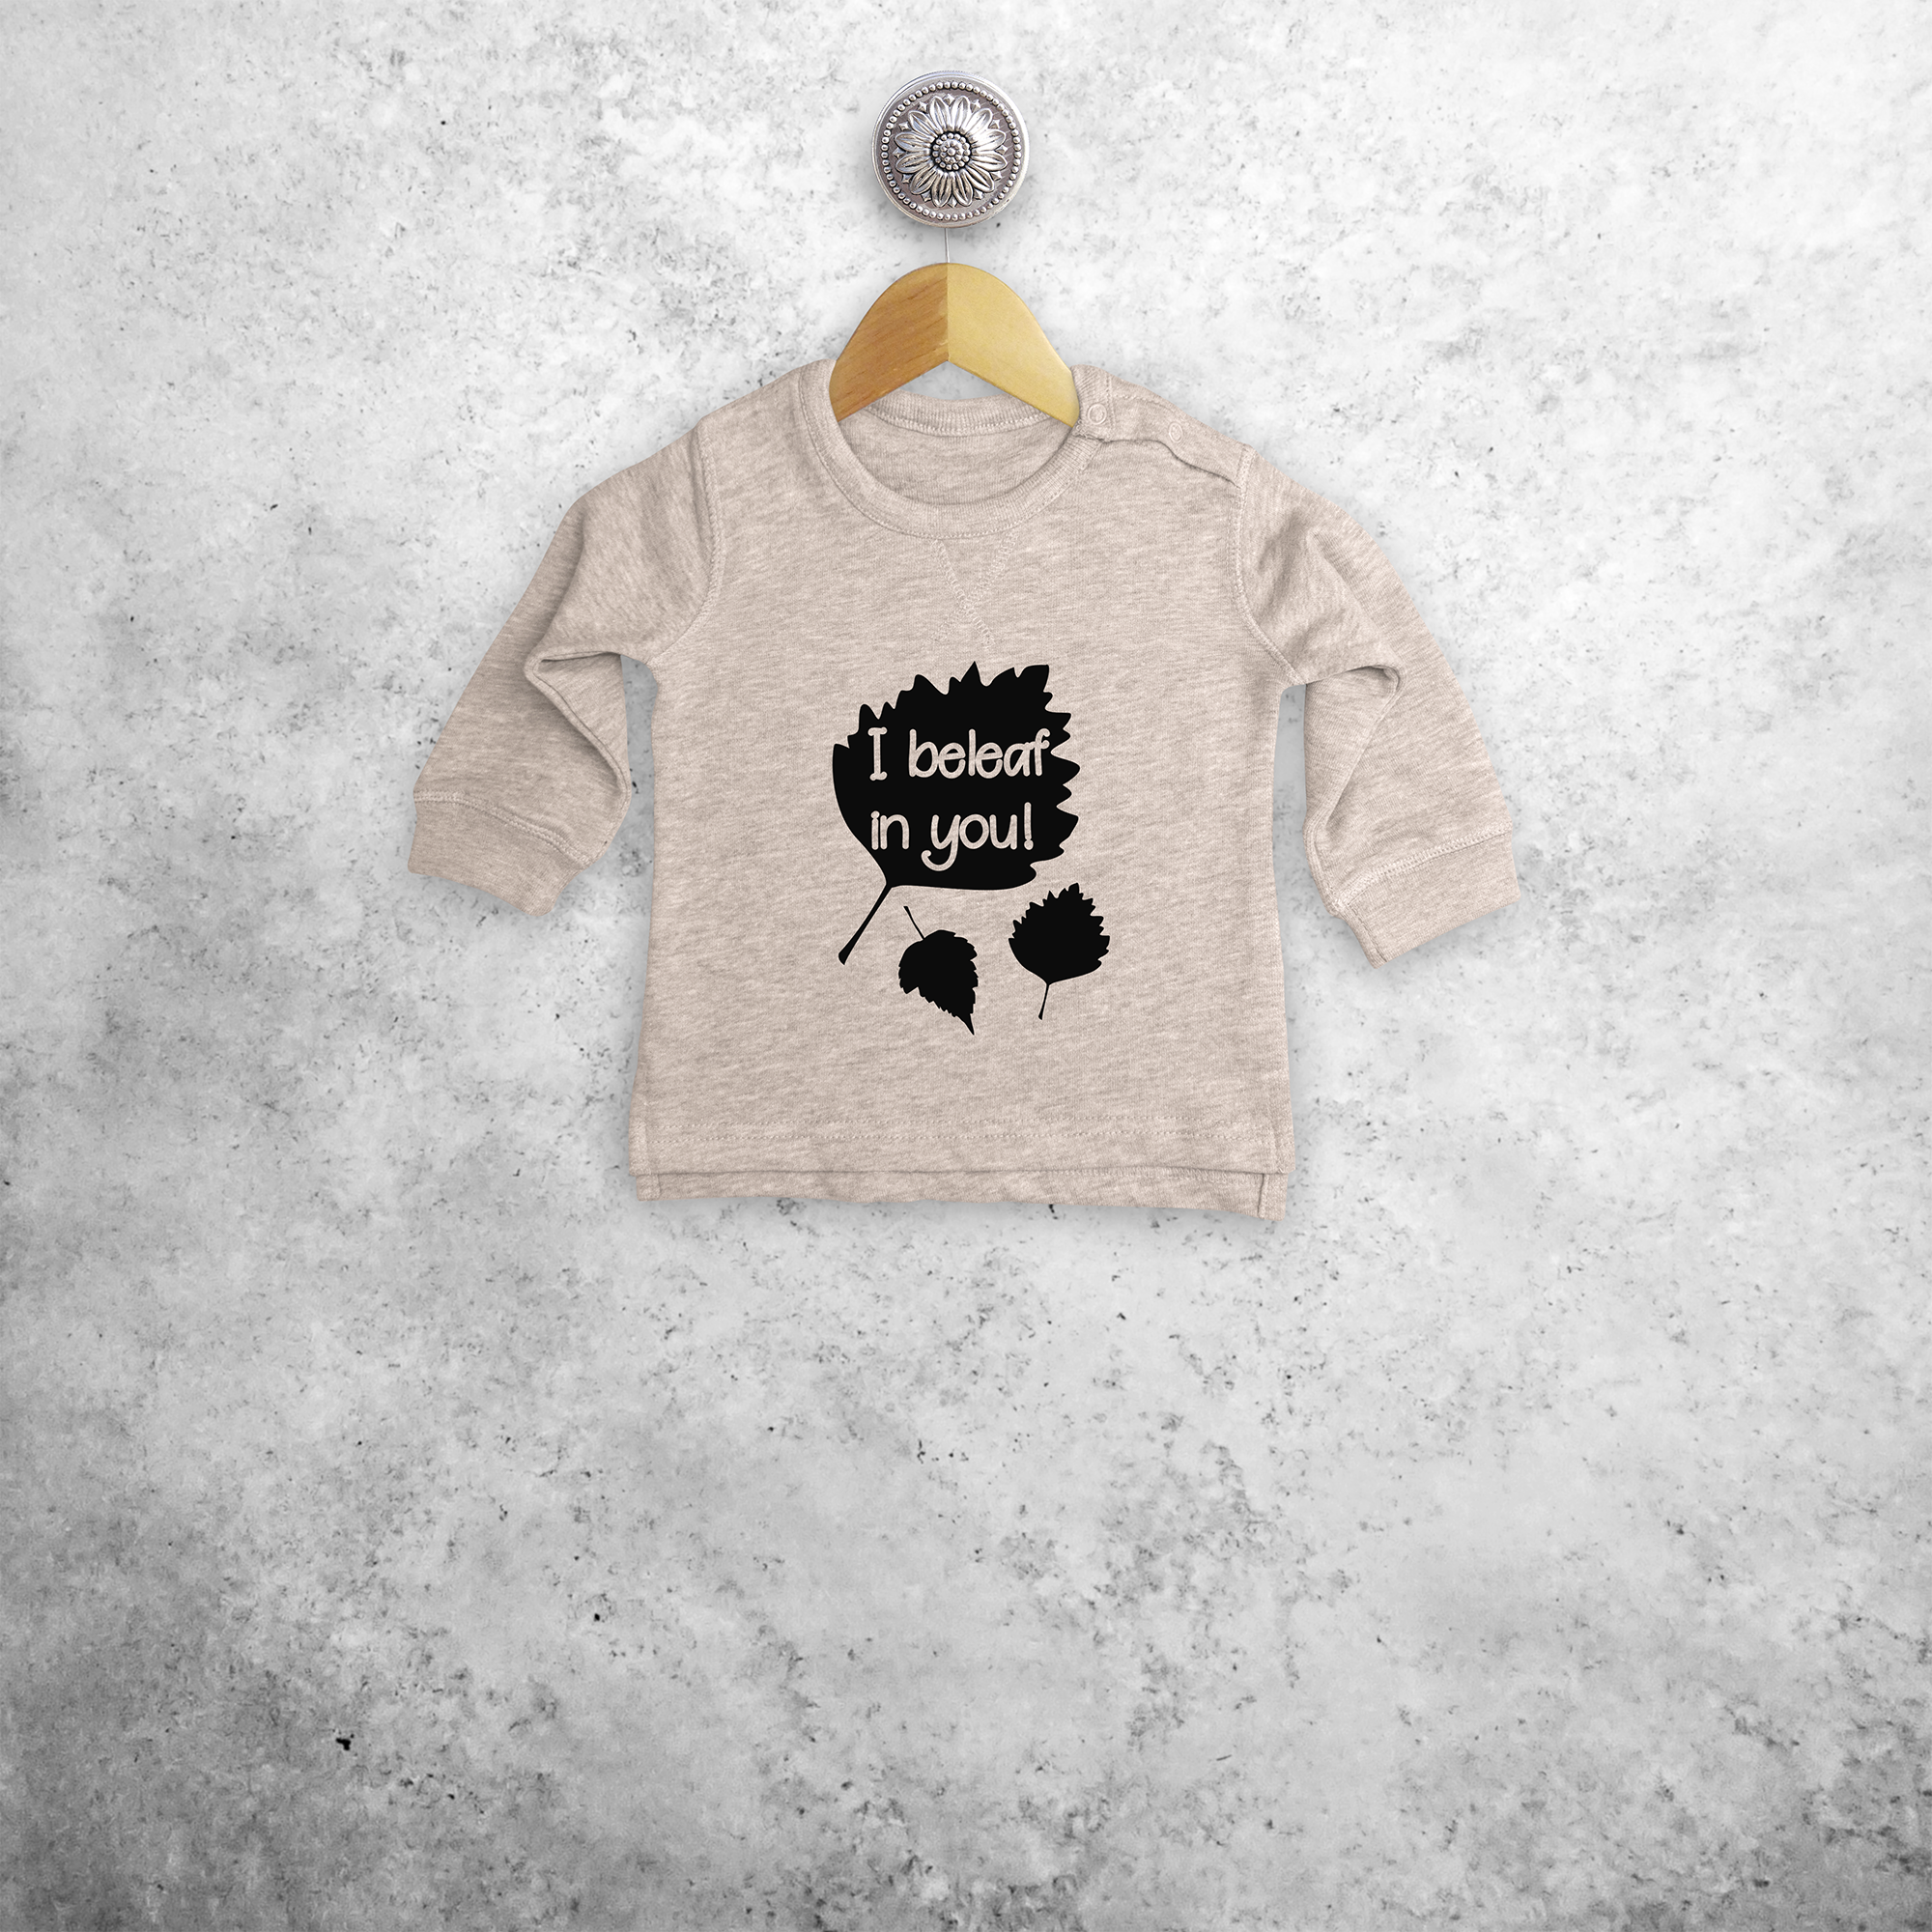 'I beleaf in you' baby sweater